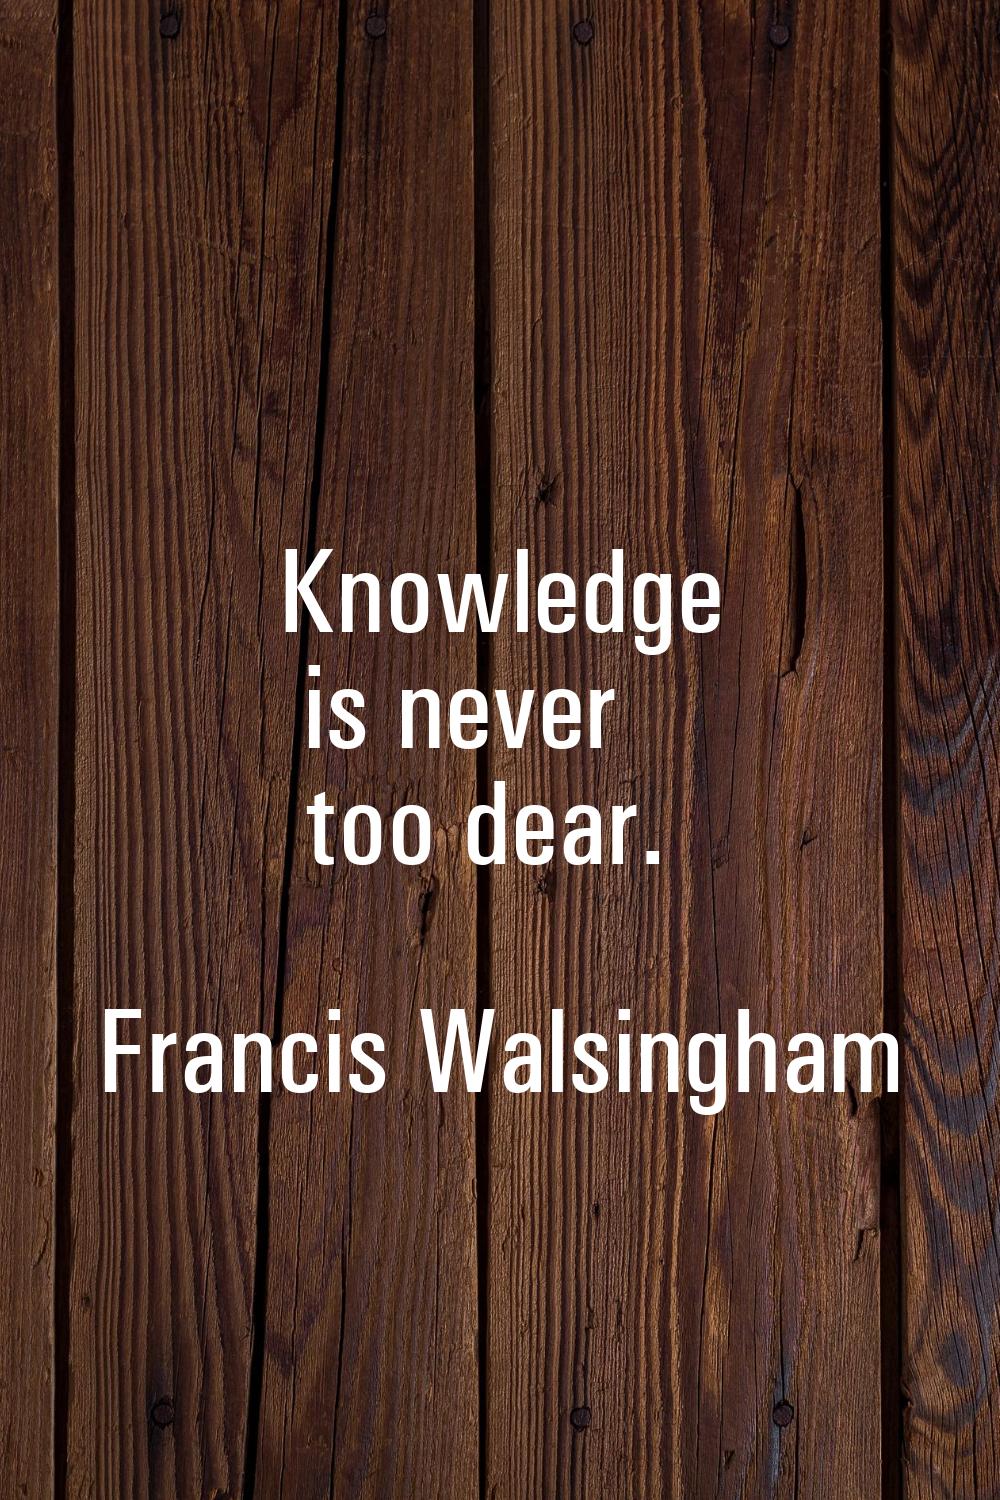 Knowledge is never too dear.